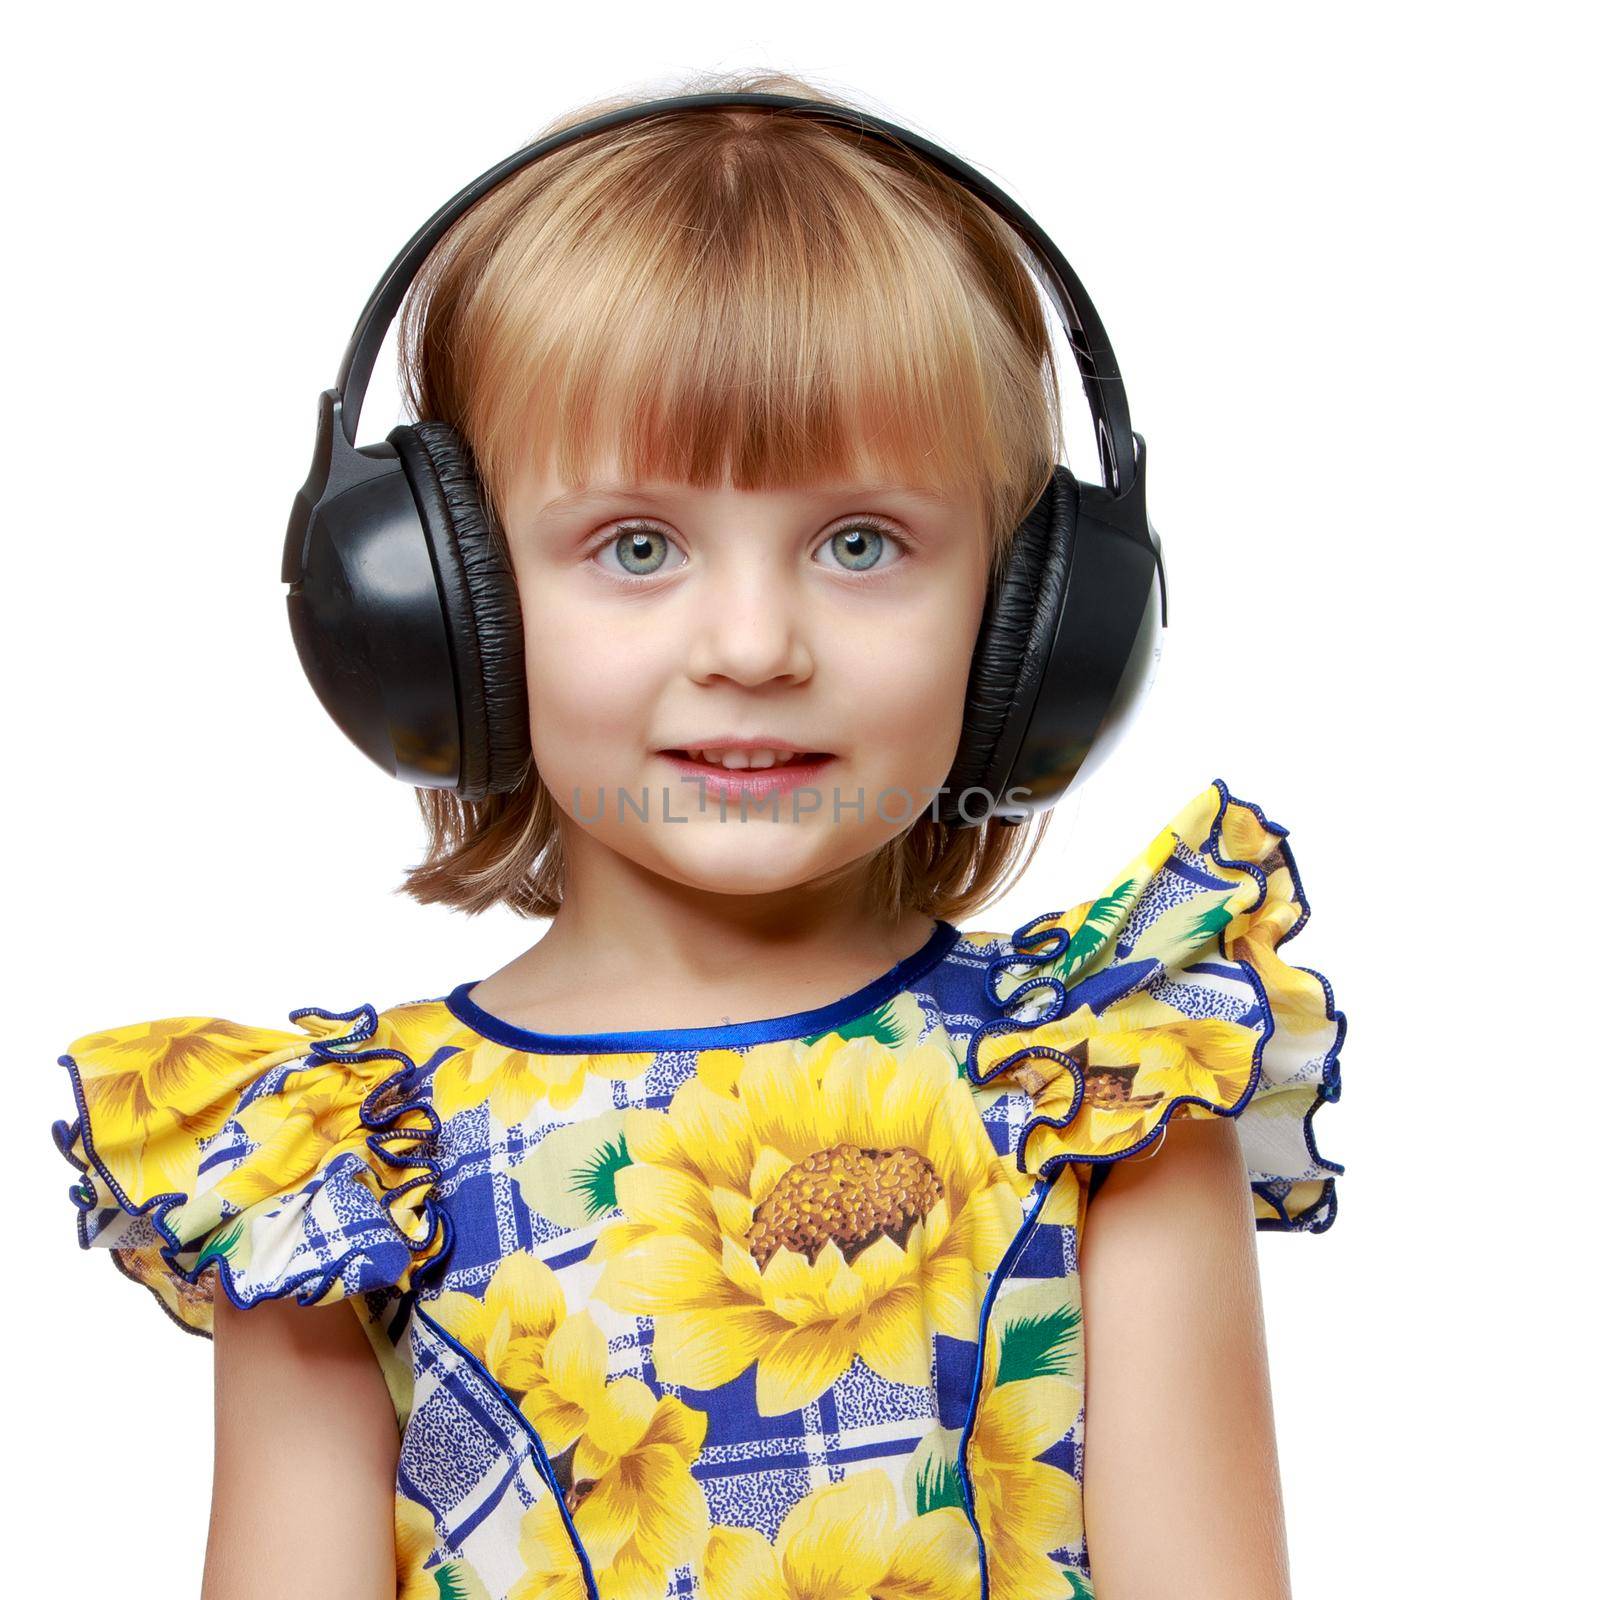 Beautiful little girl listening to music through large stereo headphones. The concept of musical education, advertising of musical goods, CDs of various performers. Isolated on white background.